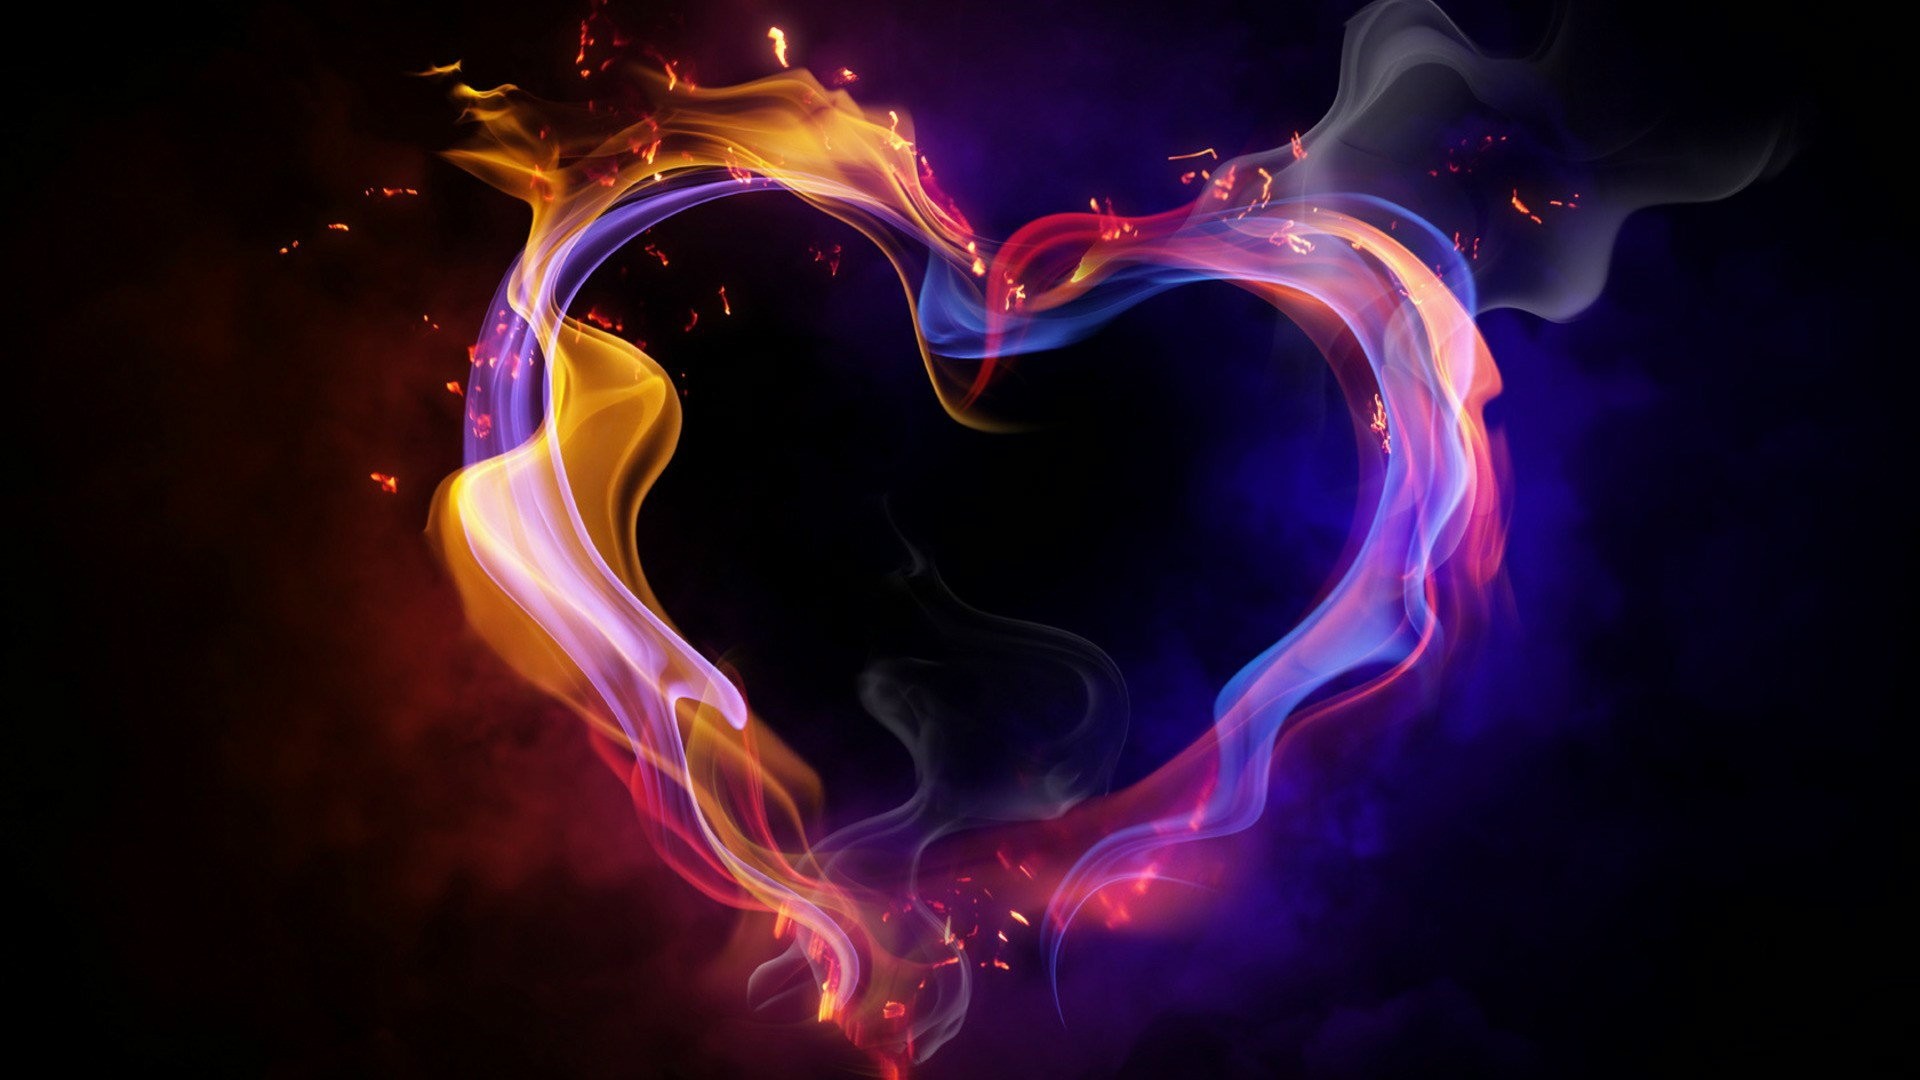 Hd Cool Color Abstract Heart Desktop Wallpapers Backgrounds